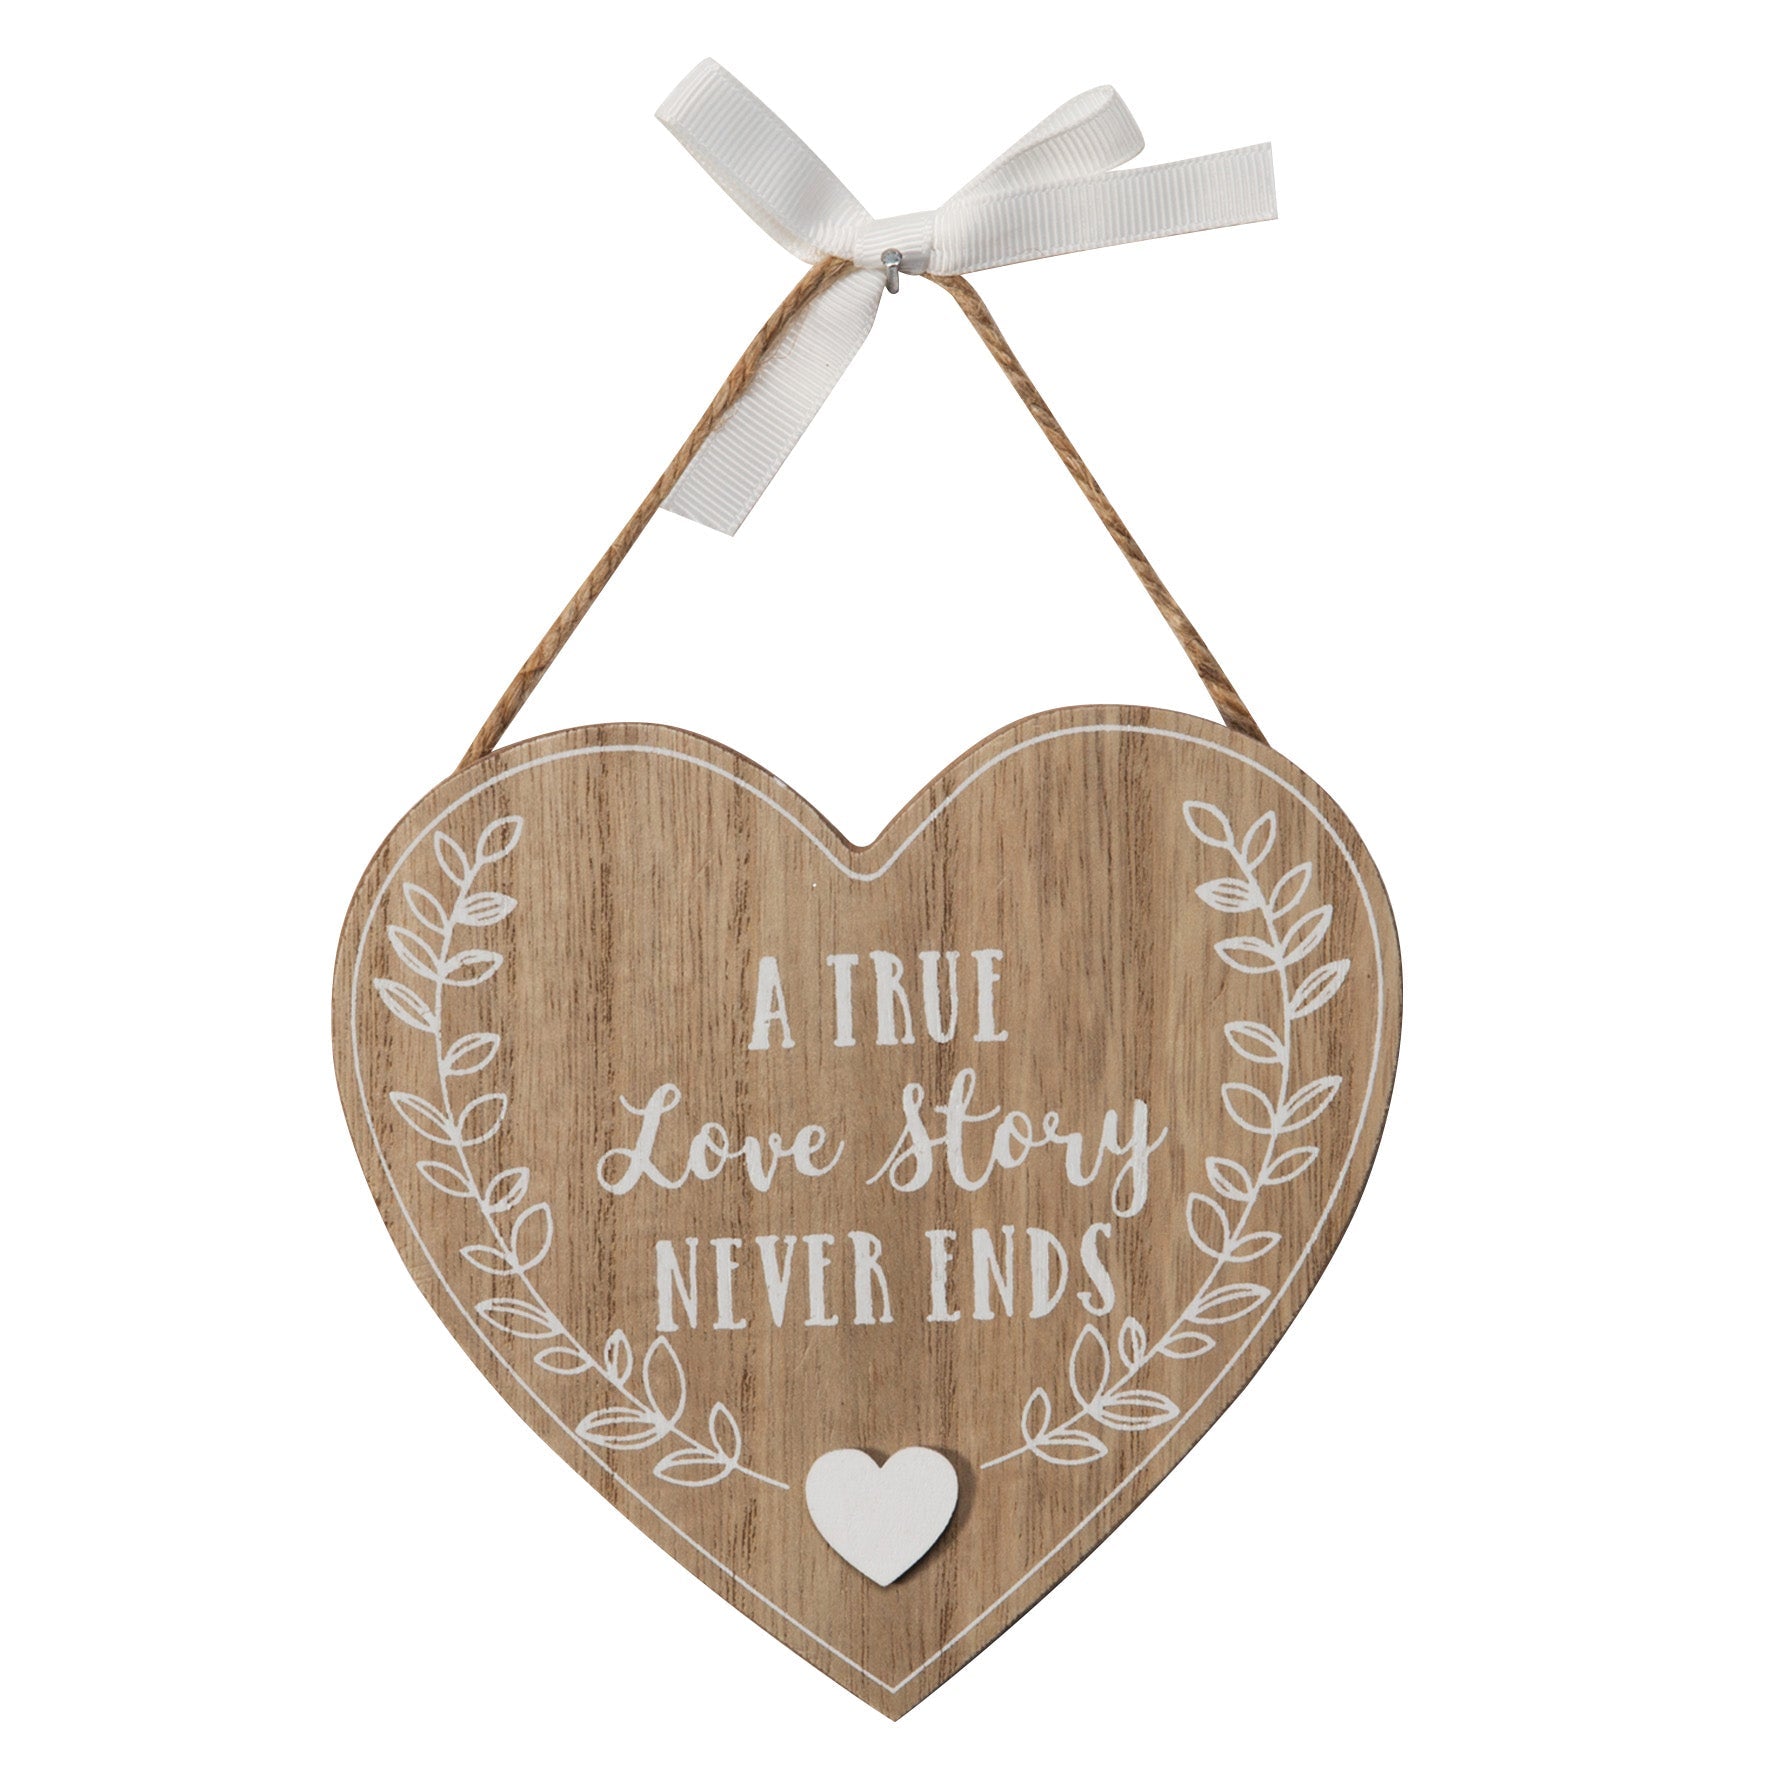 Love Story 'A True Love Story Never Ends' Wooden Heart